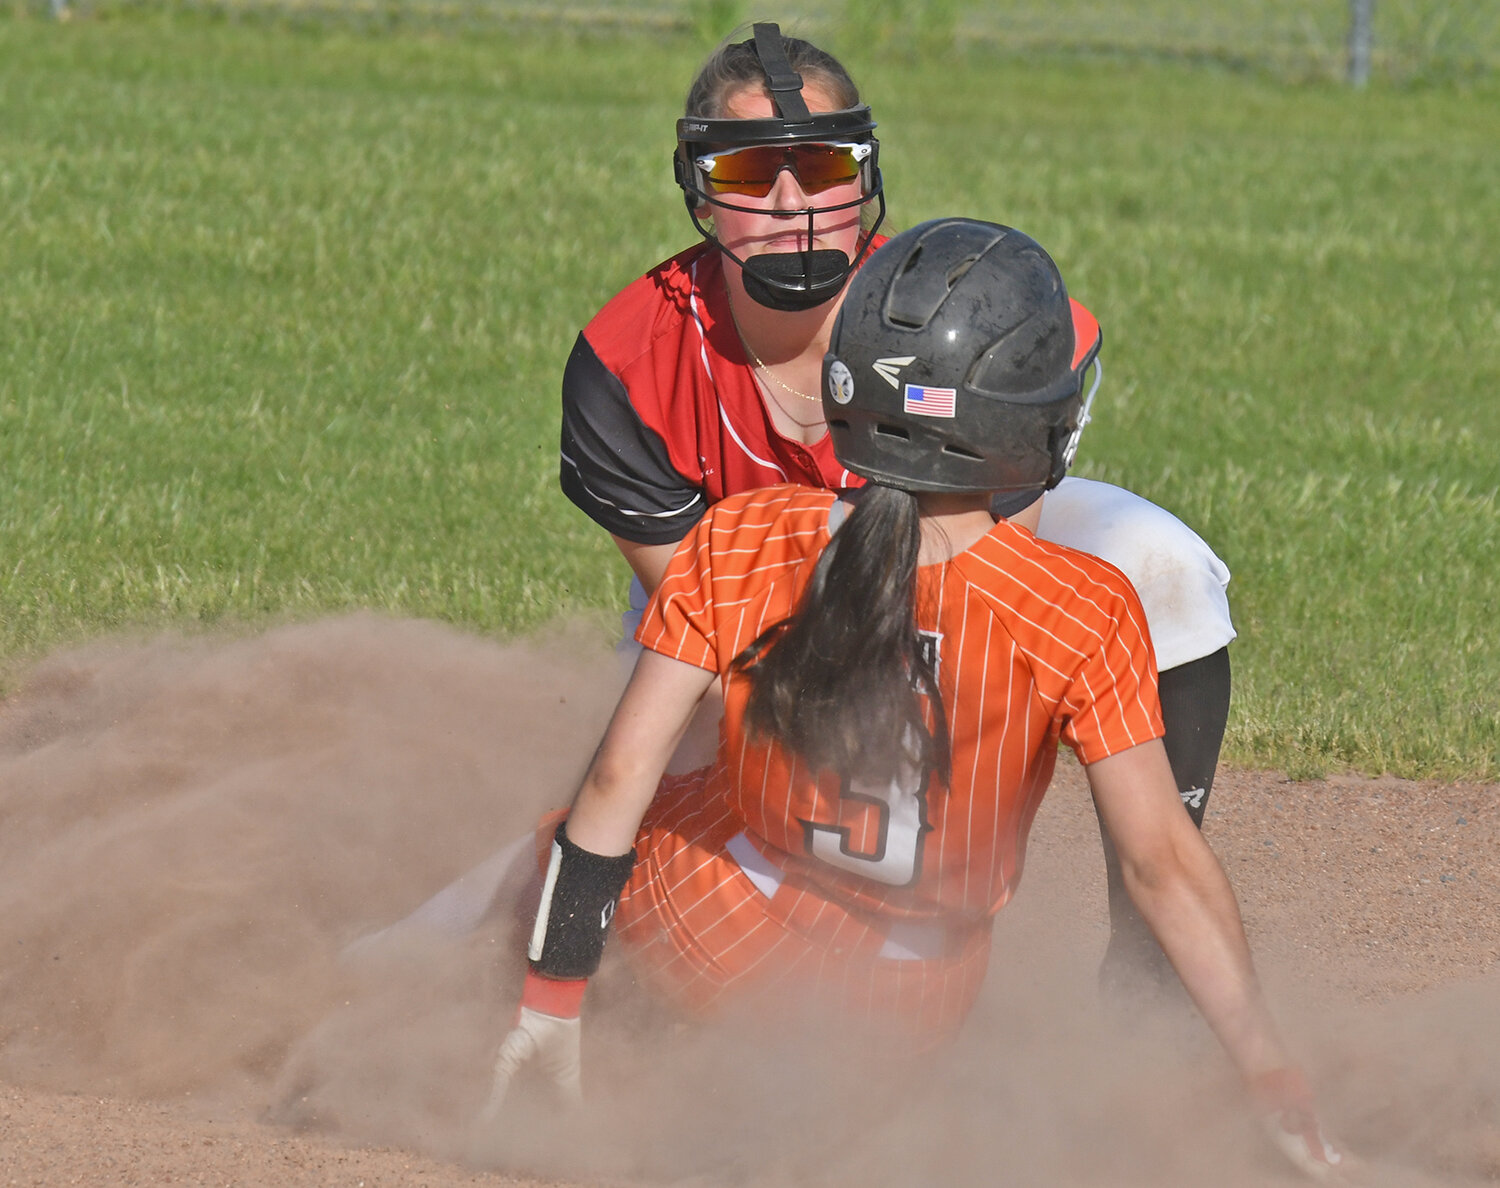 Rome Free Academy baserunner Kenidee Campbell slides safely into second with Baldwinsville's Jenna Martin attempting to put the tag on her. RFA lost 4-2 in the Class AA quarterfinals.